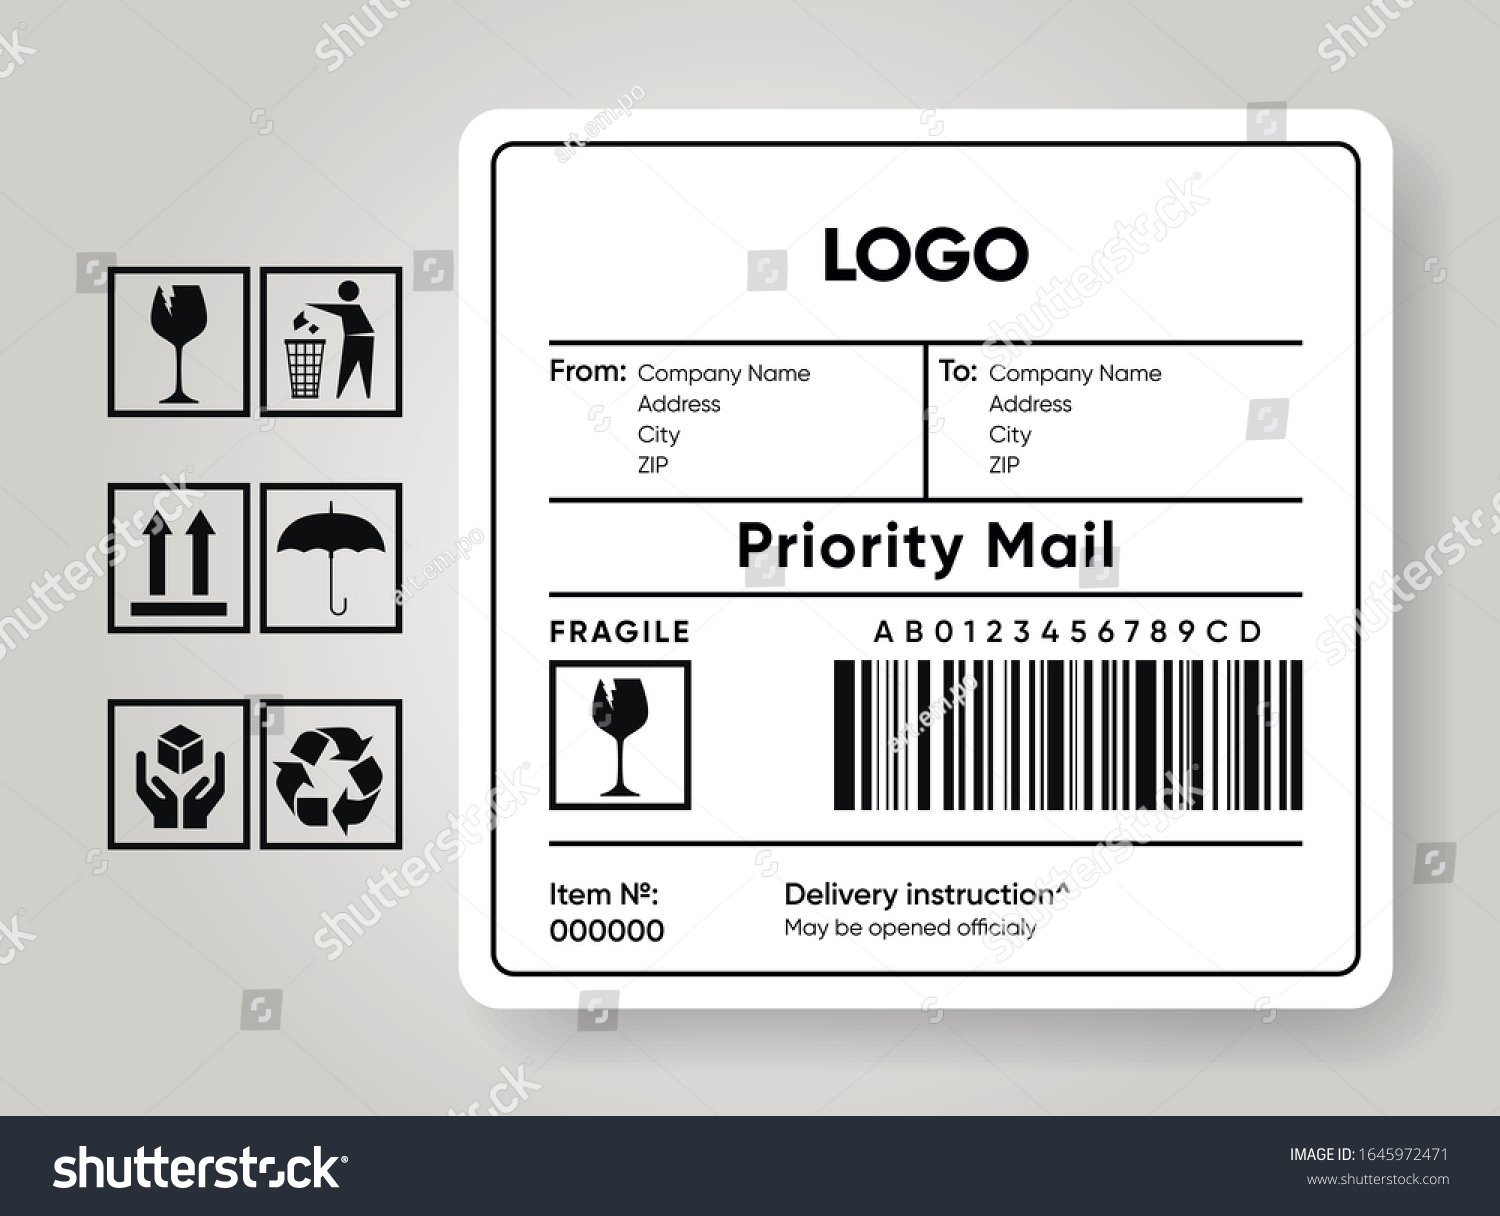 Shipment label template. Cargo sticker. Delivery bar code mockup. Fragile, handle, recycle icon. Information about company recipient. Priority mail with barcode mock up. Vector illustration #1645972471